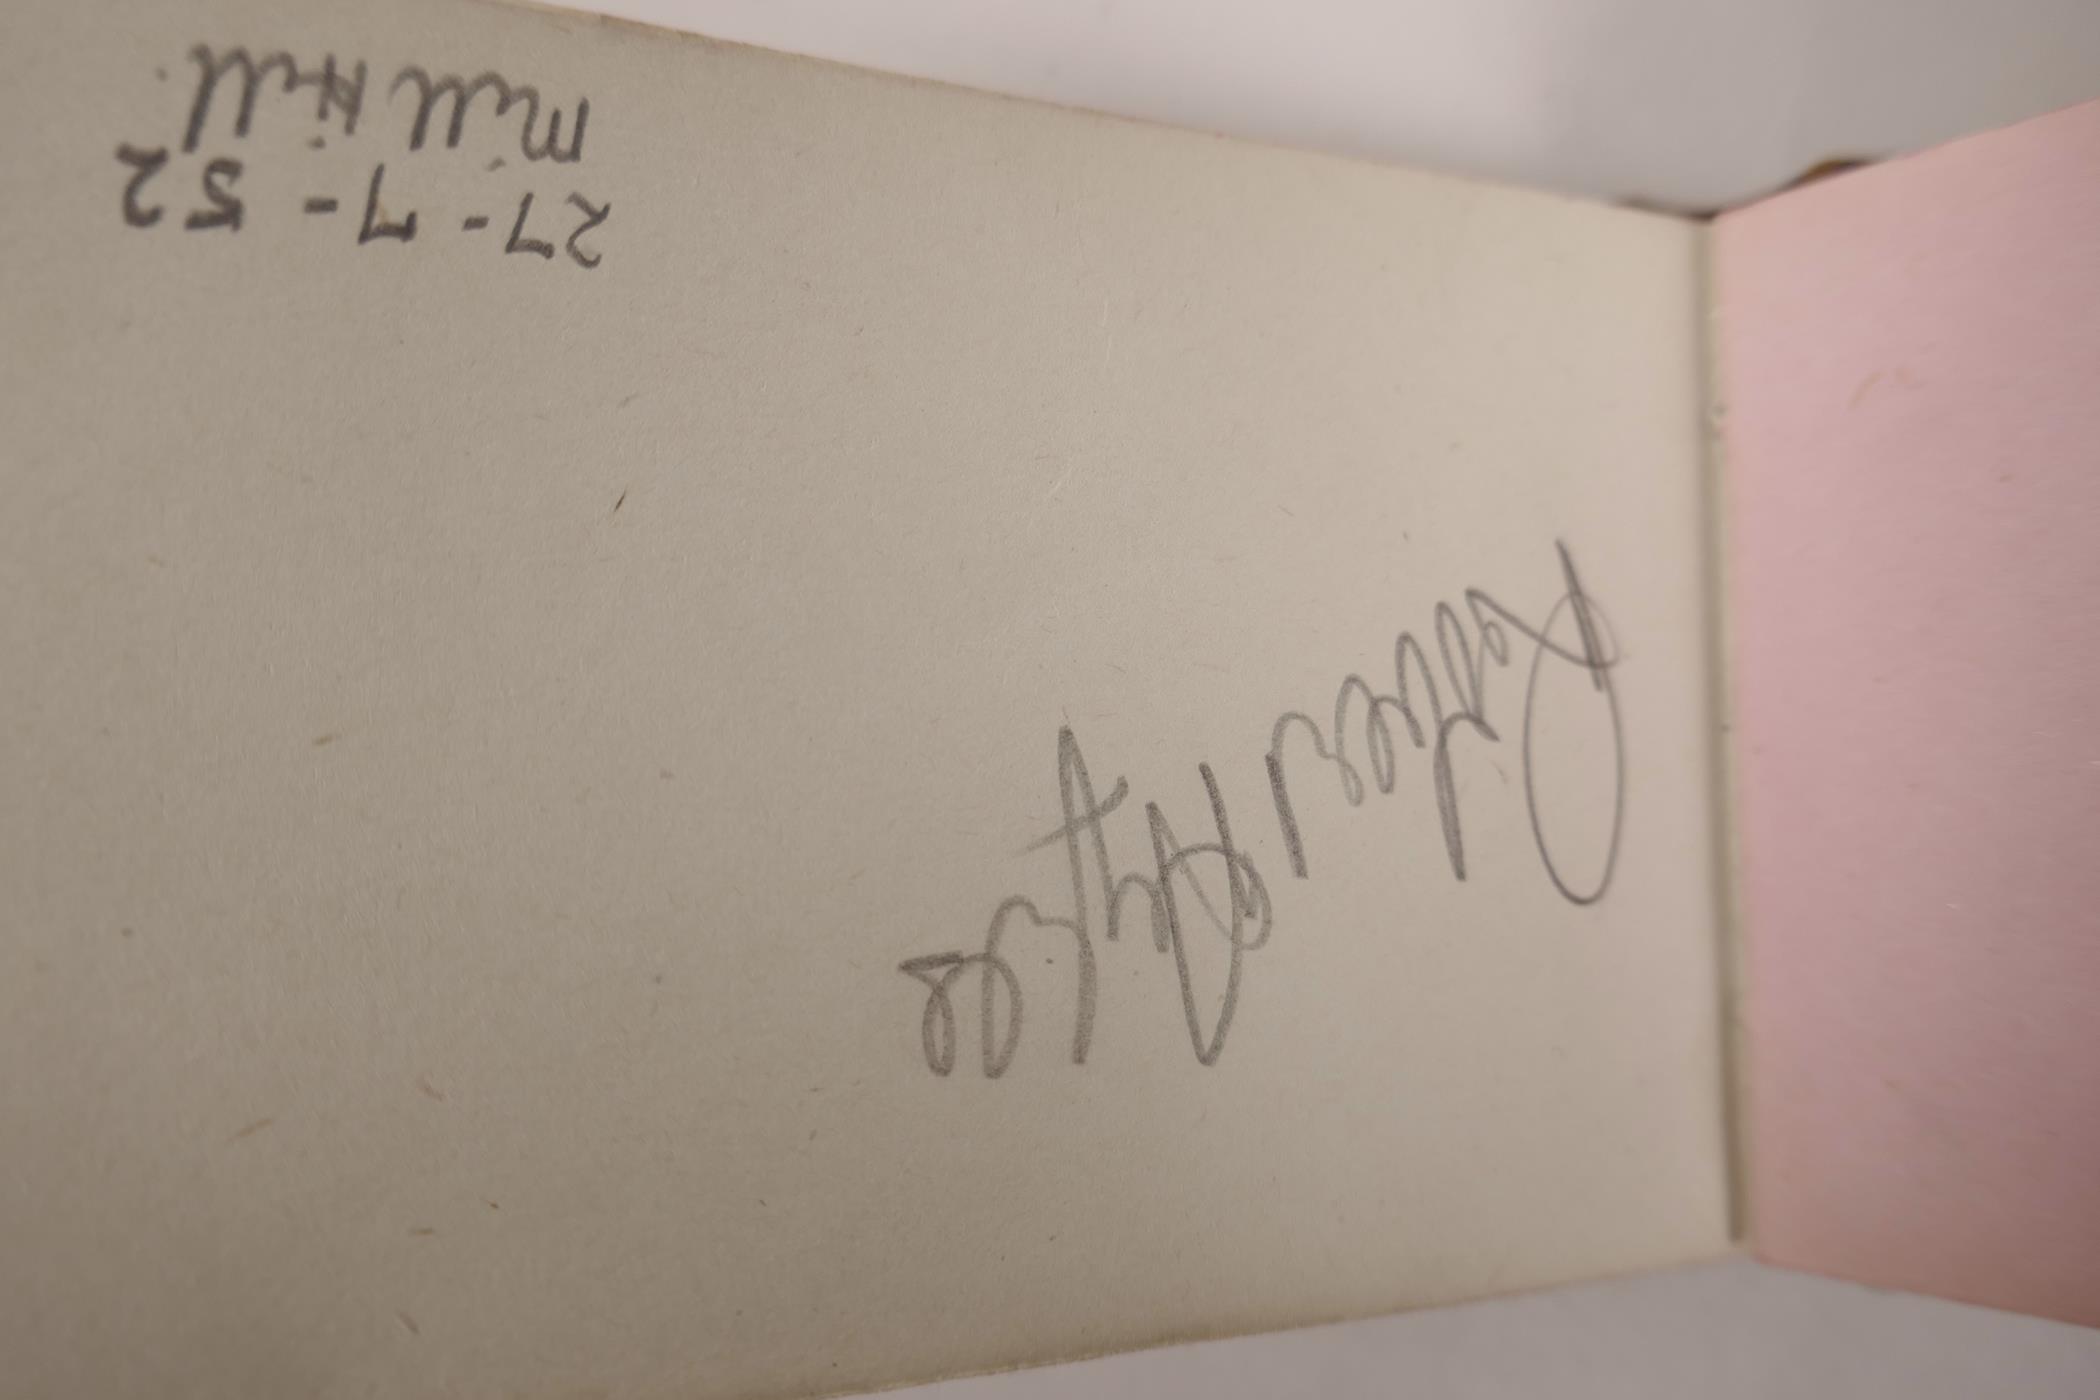 An autograph album containing numerous signatures of England cricketers from the 1940s-50s - Image 3 of 3